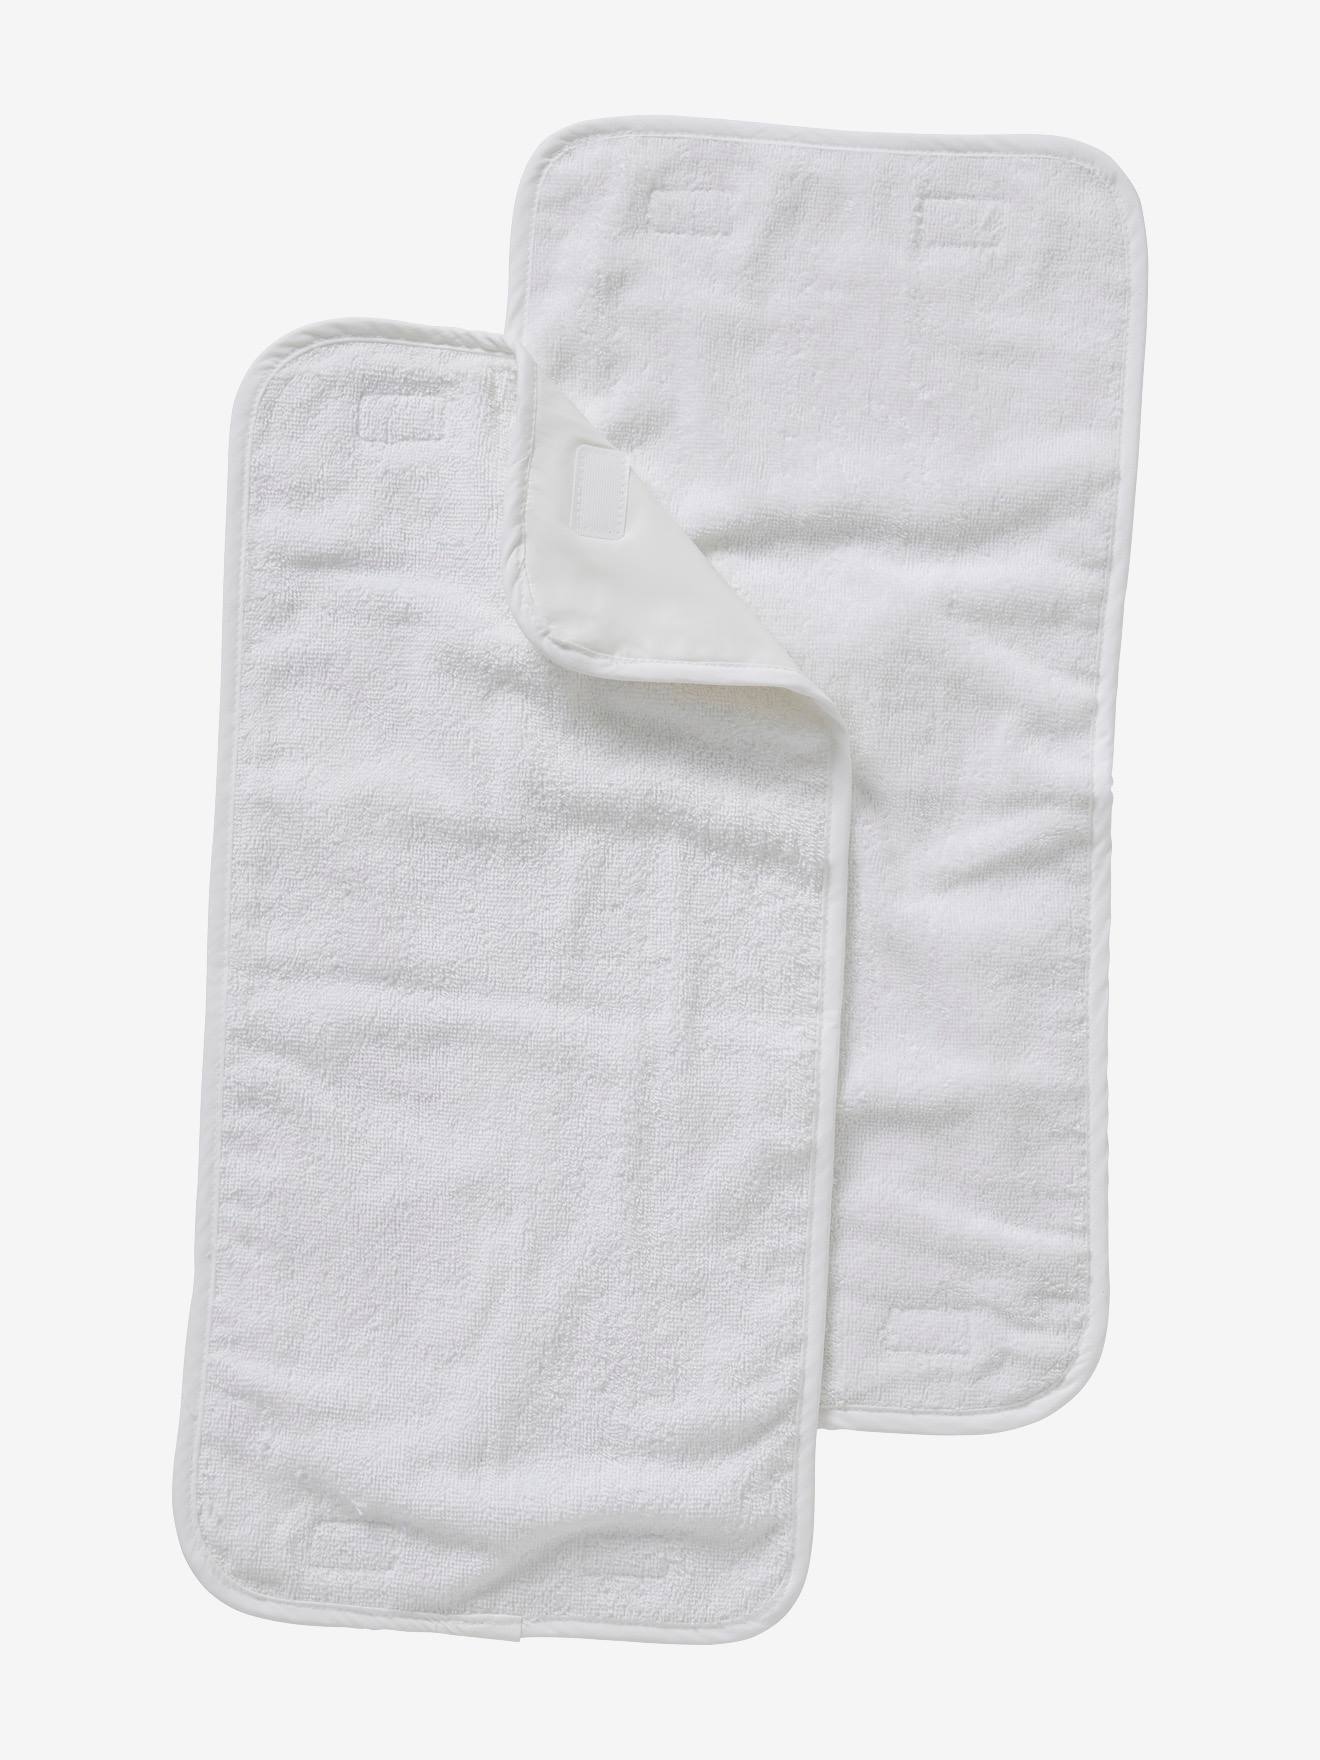 Pack of 2 Towel Changing Pads for Travel Changing Mat white